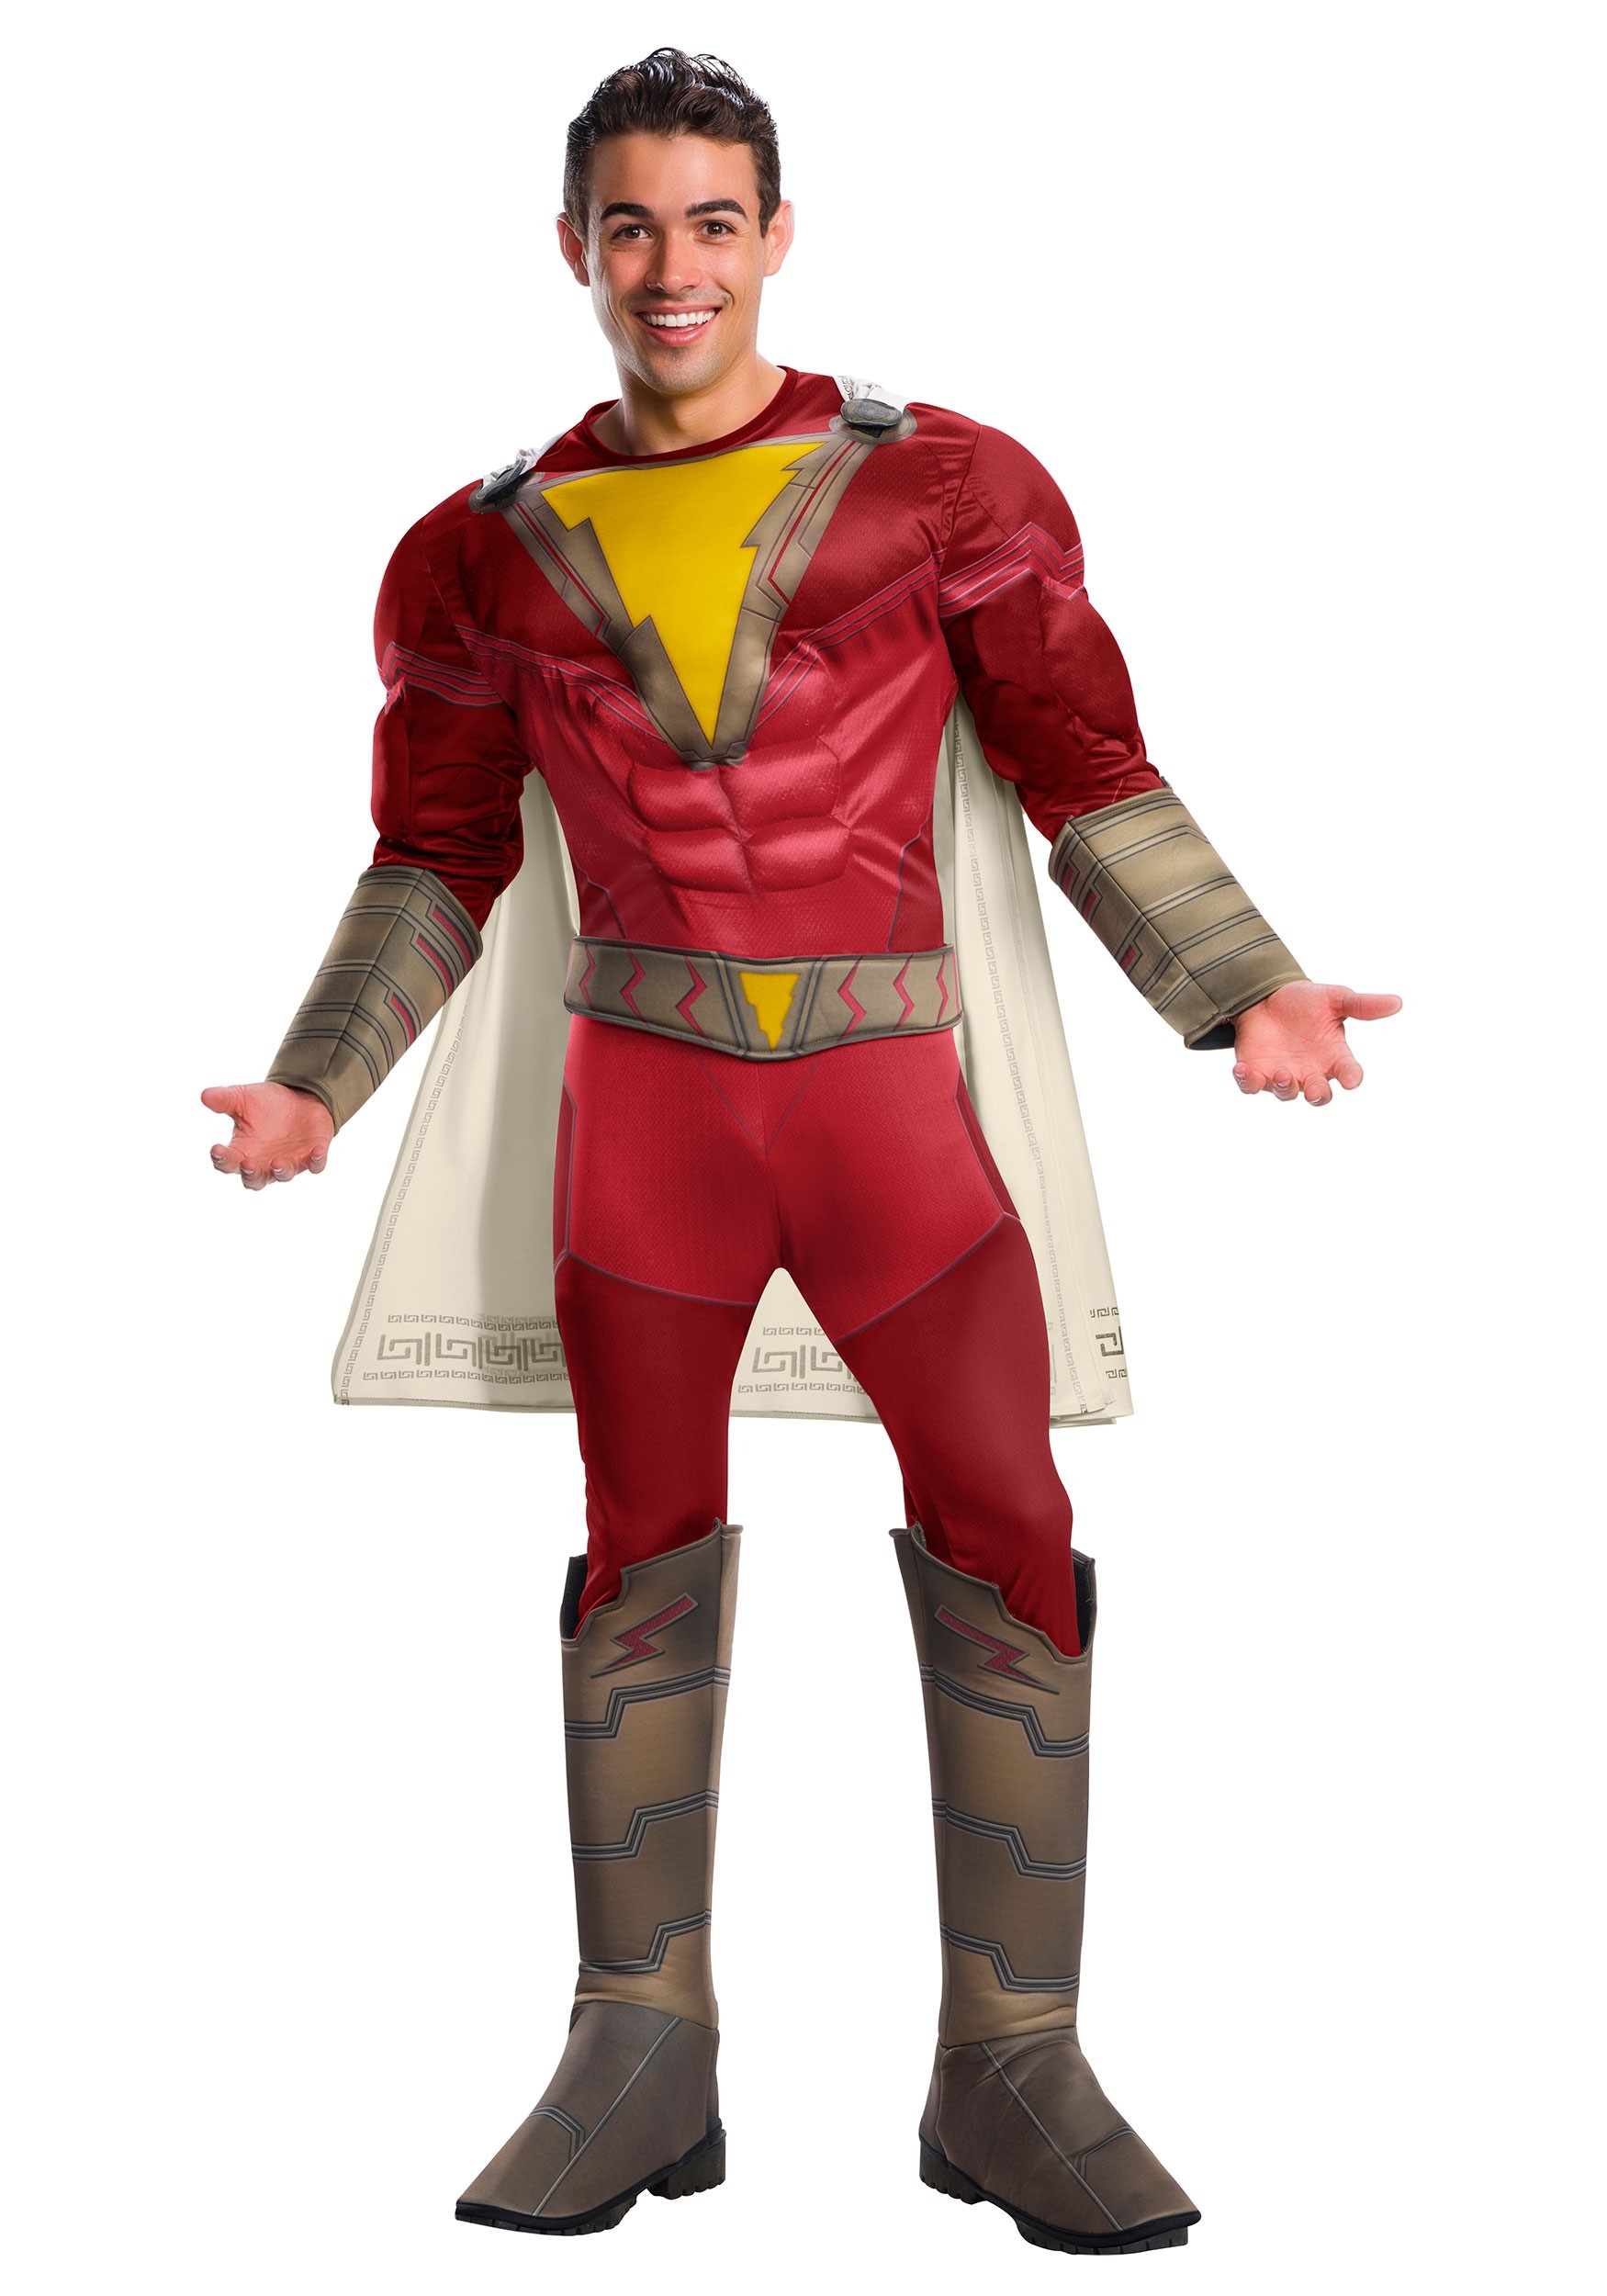 Image of Shazam! Deluxe Costume for Adults ID RU700799-XL